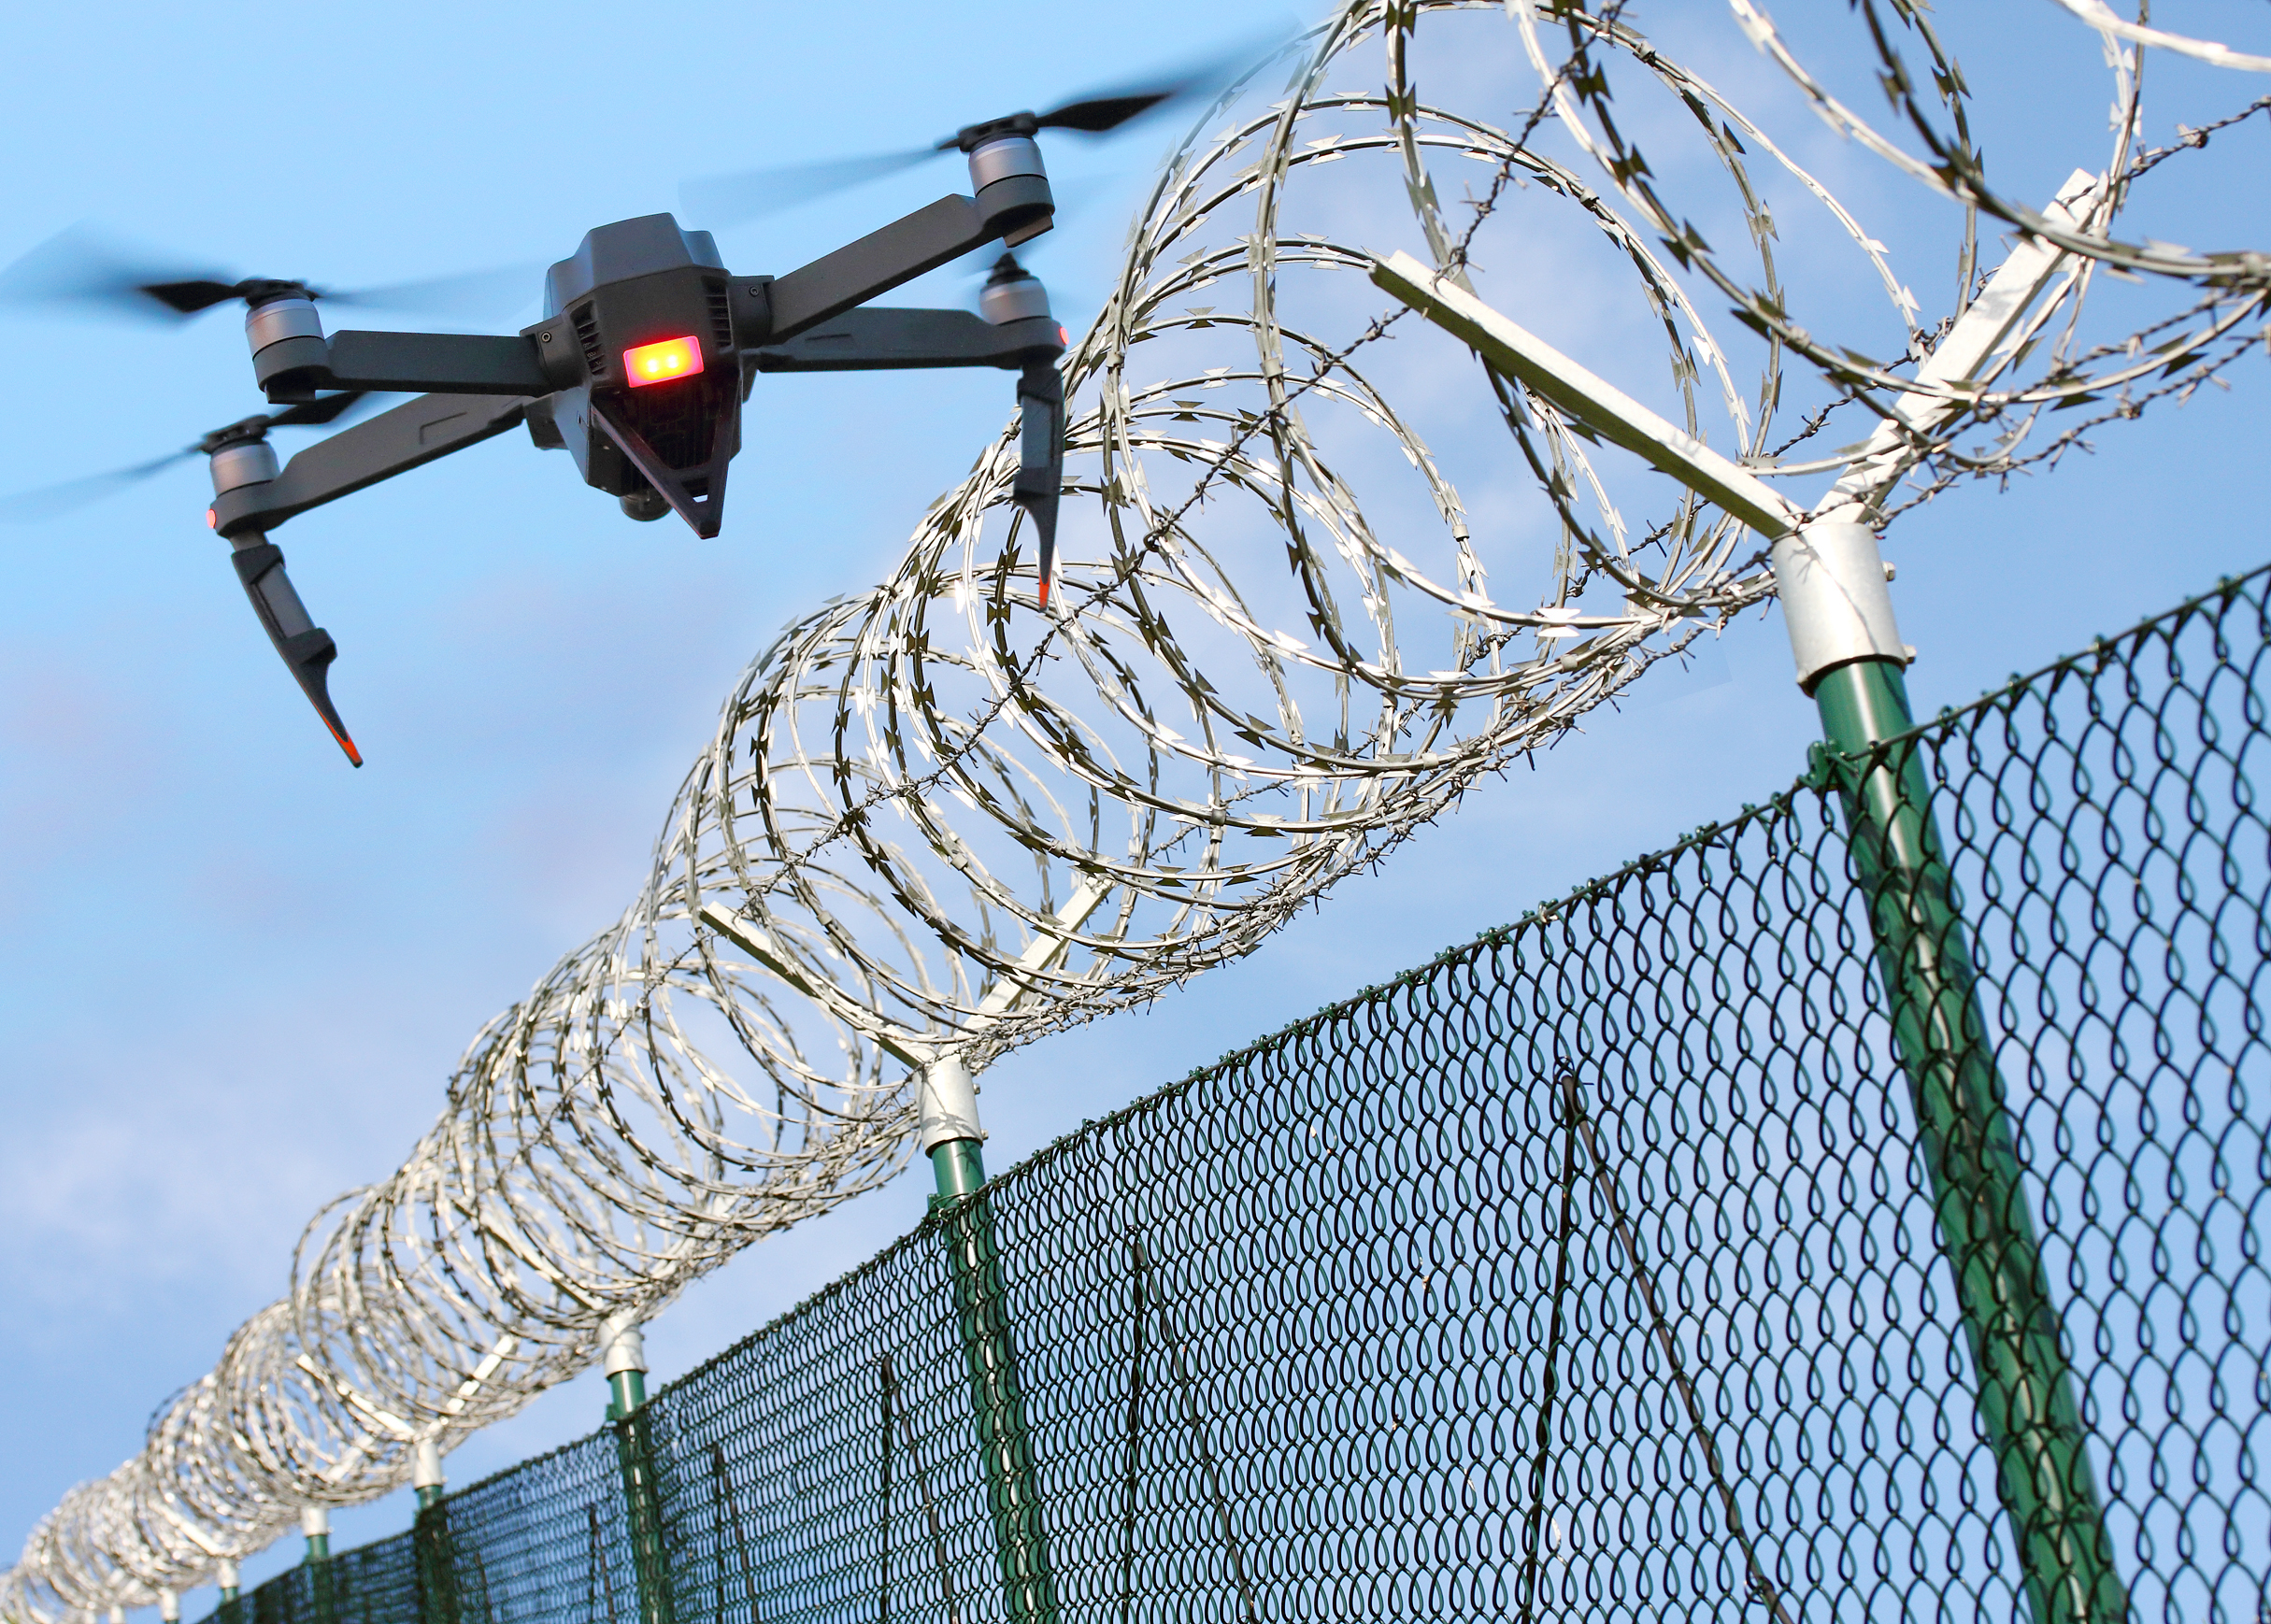 Drone flying over jail fence to smuggle contraband